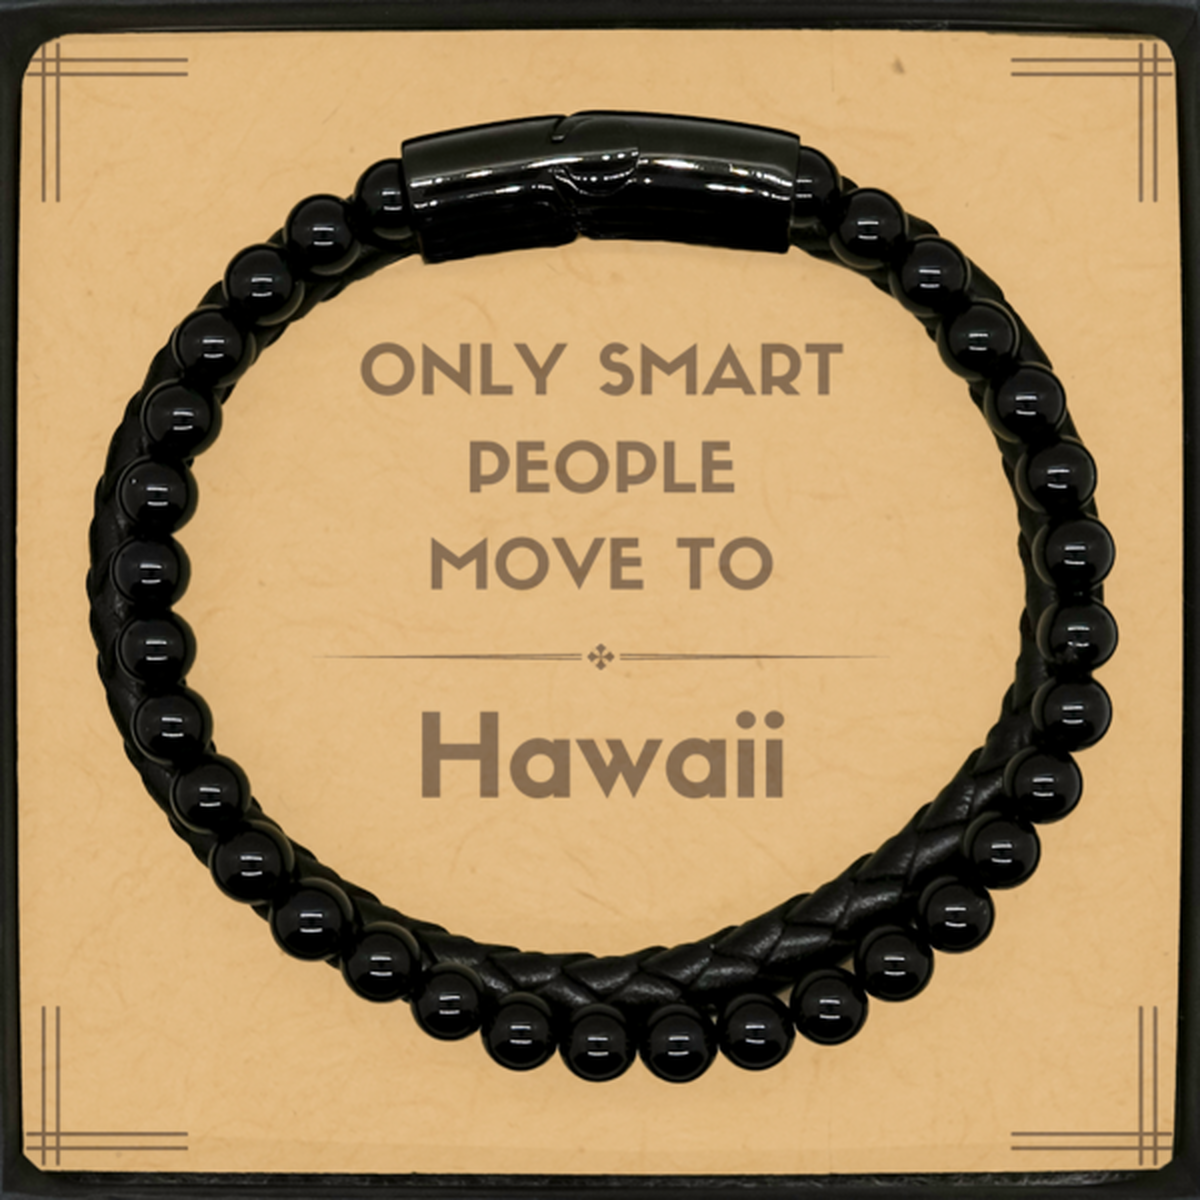 Only smart people move to Hawaii Stone Leather Bracelets, Message Card Gifts For Hawaii, Move to Hawaii Gifts for Friends Coworker Funny Saying Quote